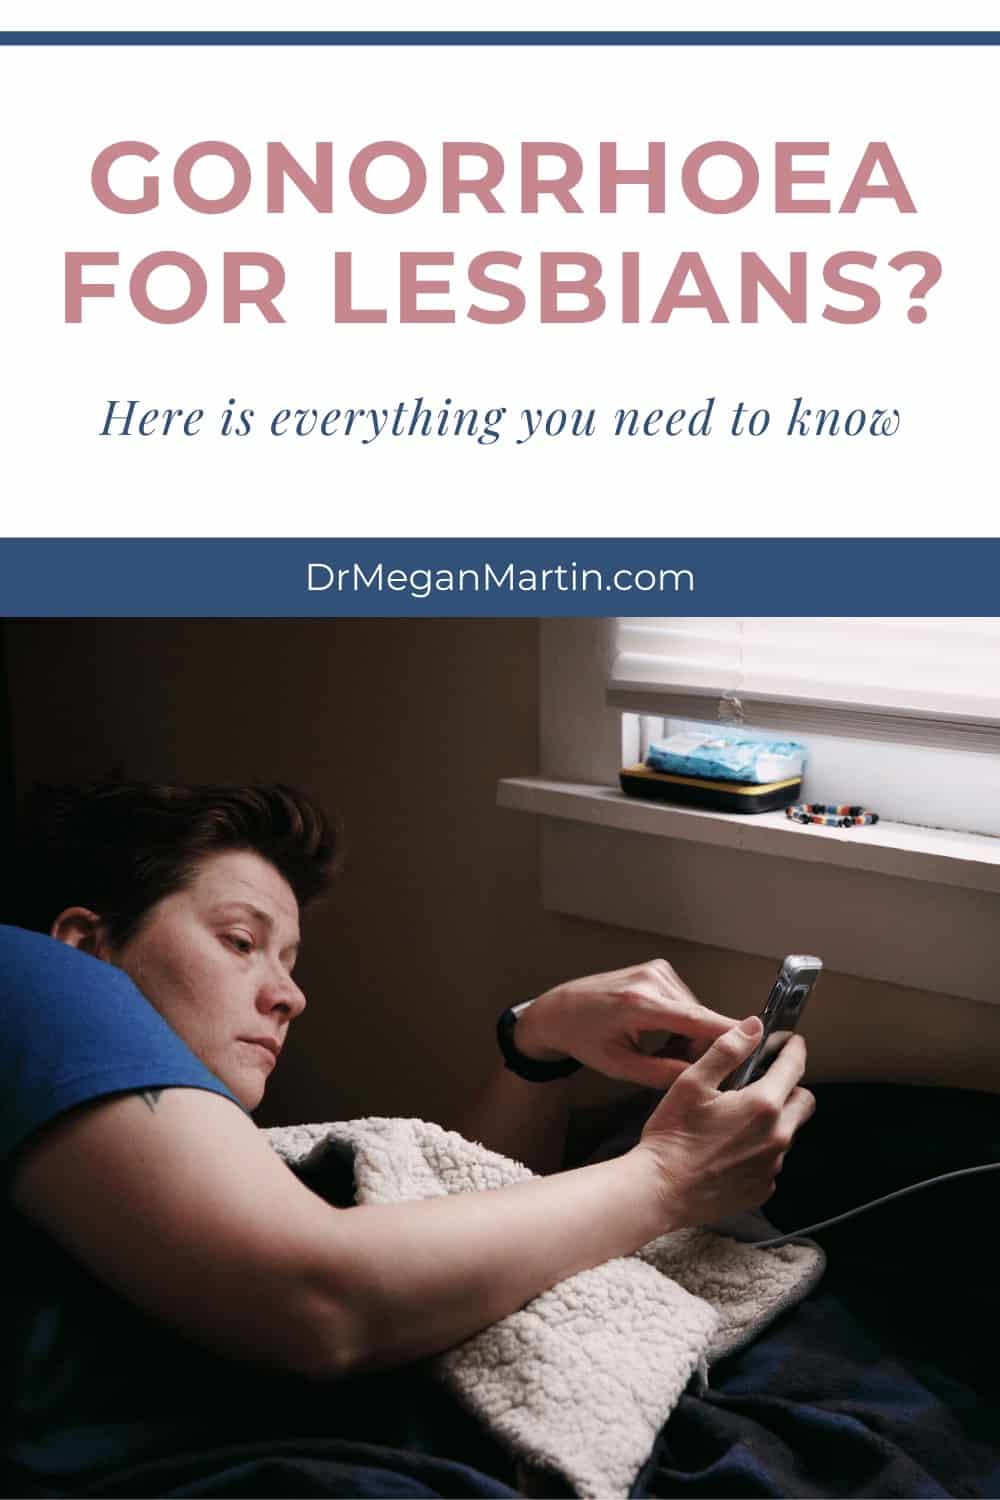 Everything you need to know about gonorrhoea for lesbians